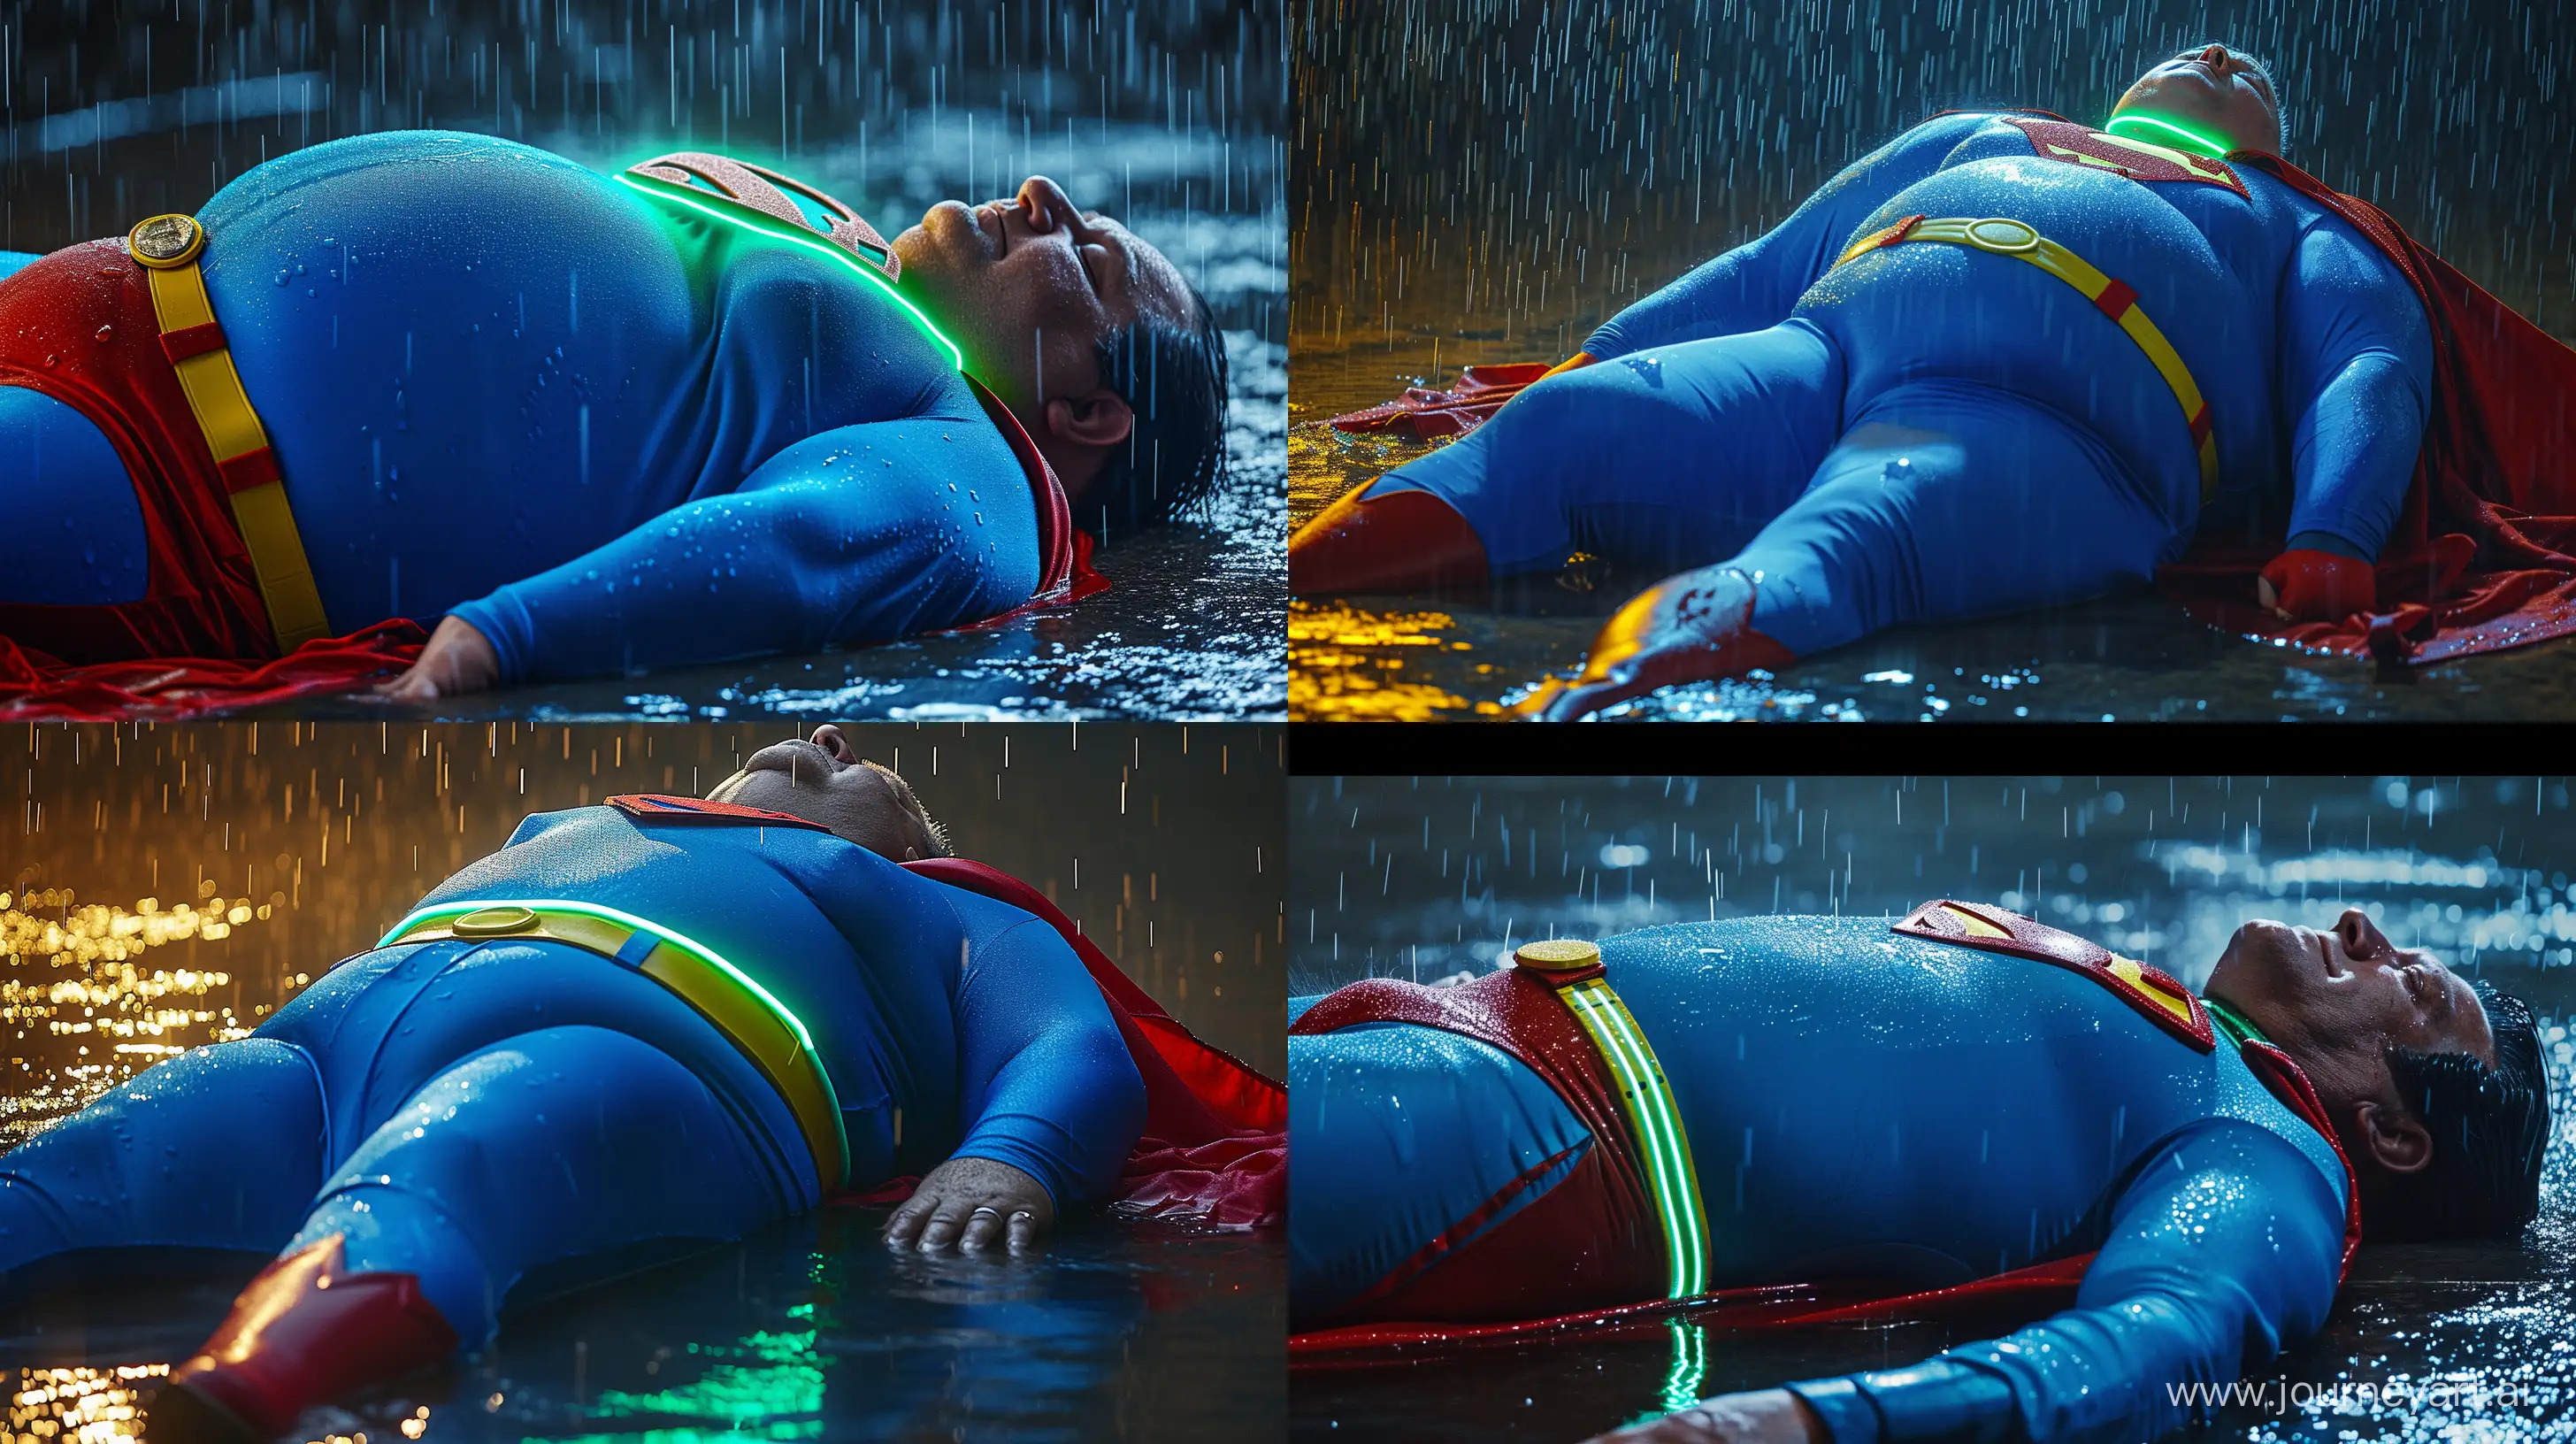 Elderly-Superman-Enjoys-Rainy-Day-in-Retro-Costume-by-the-River